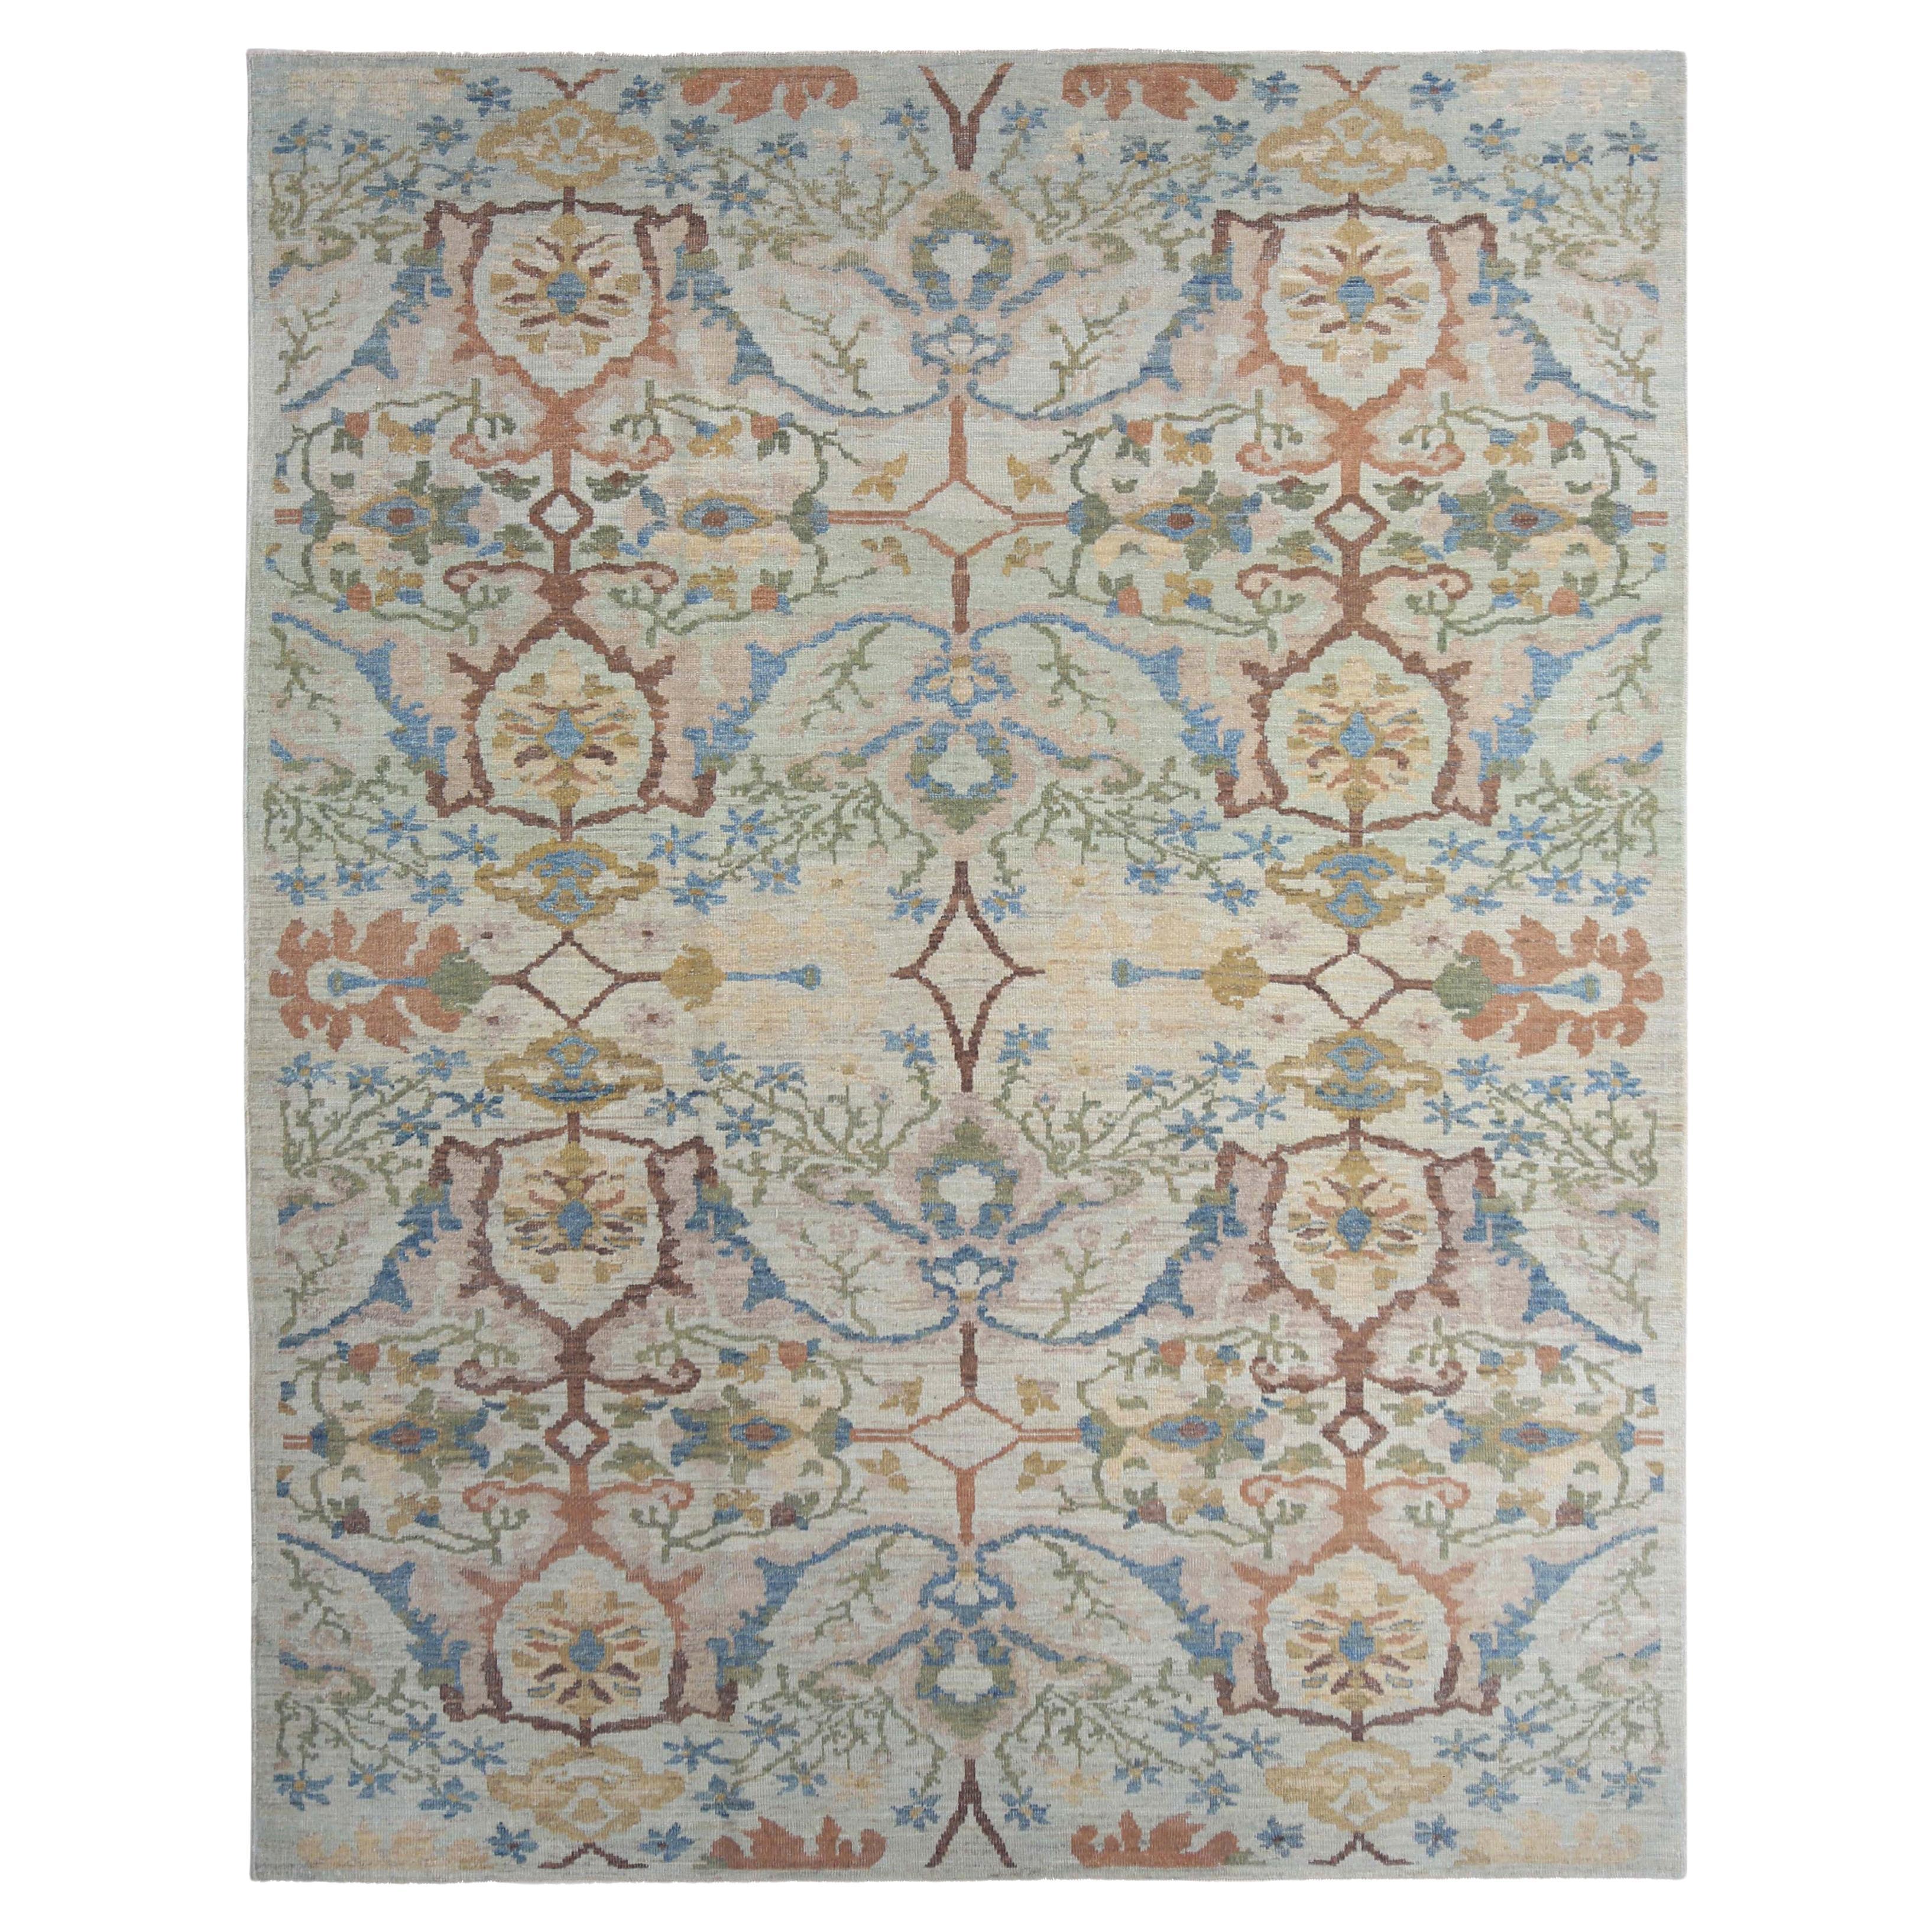 Vivid and Colorful Contemporary Sultanabad Rug